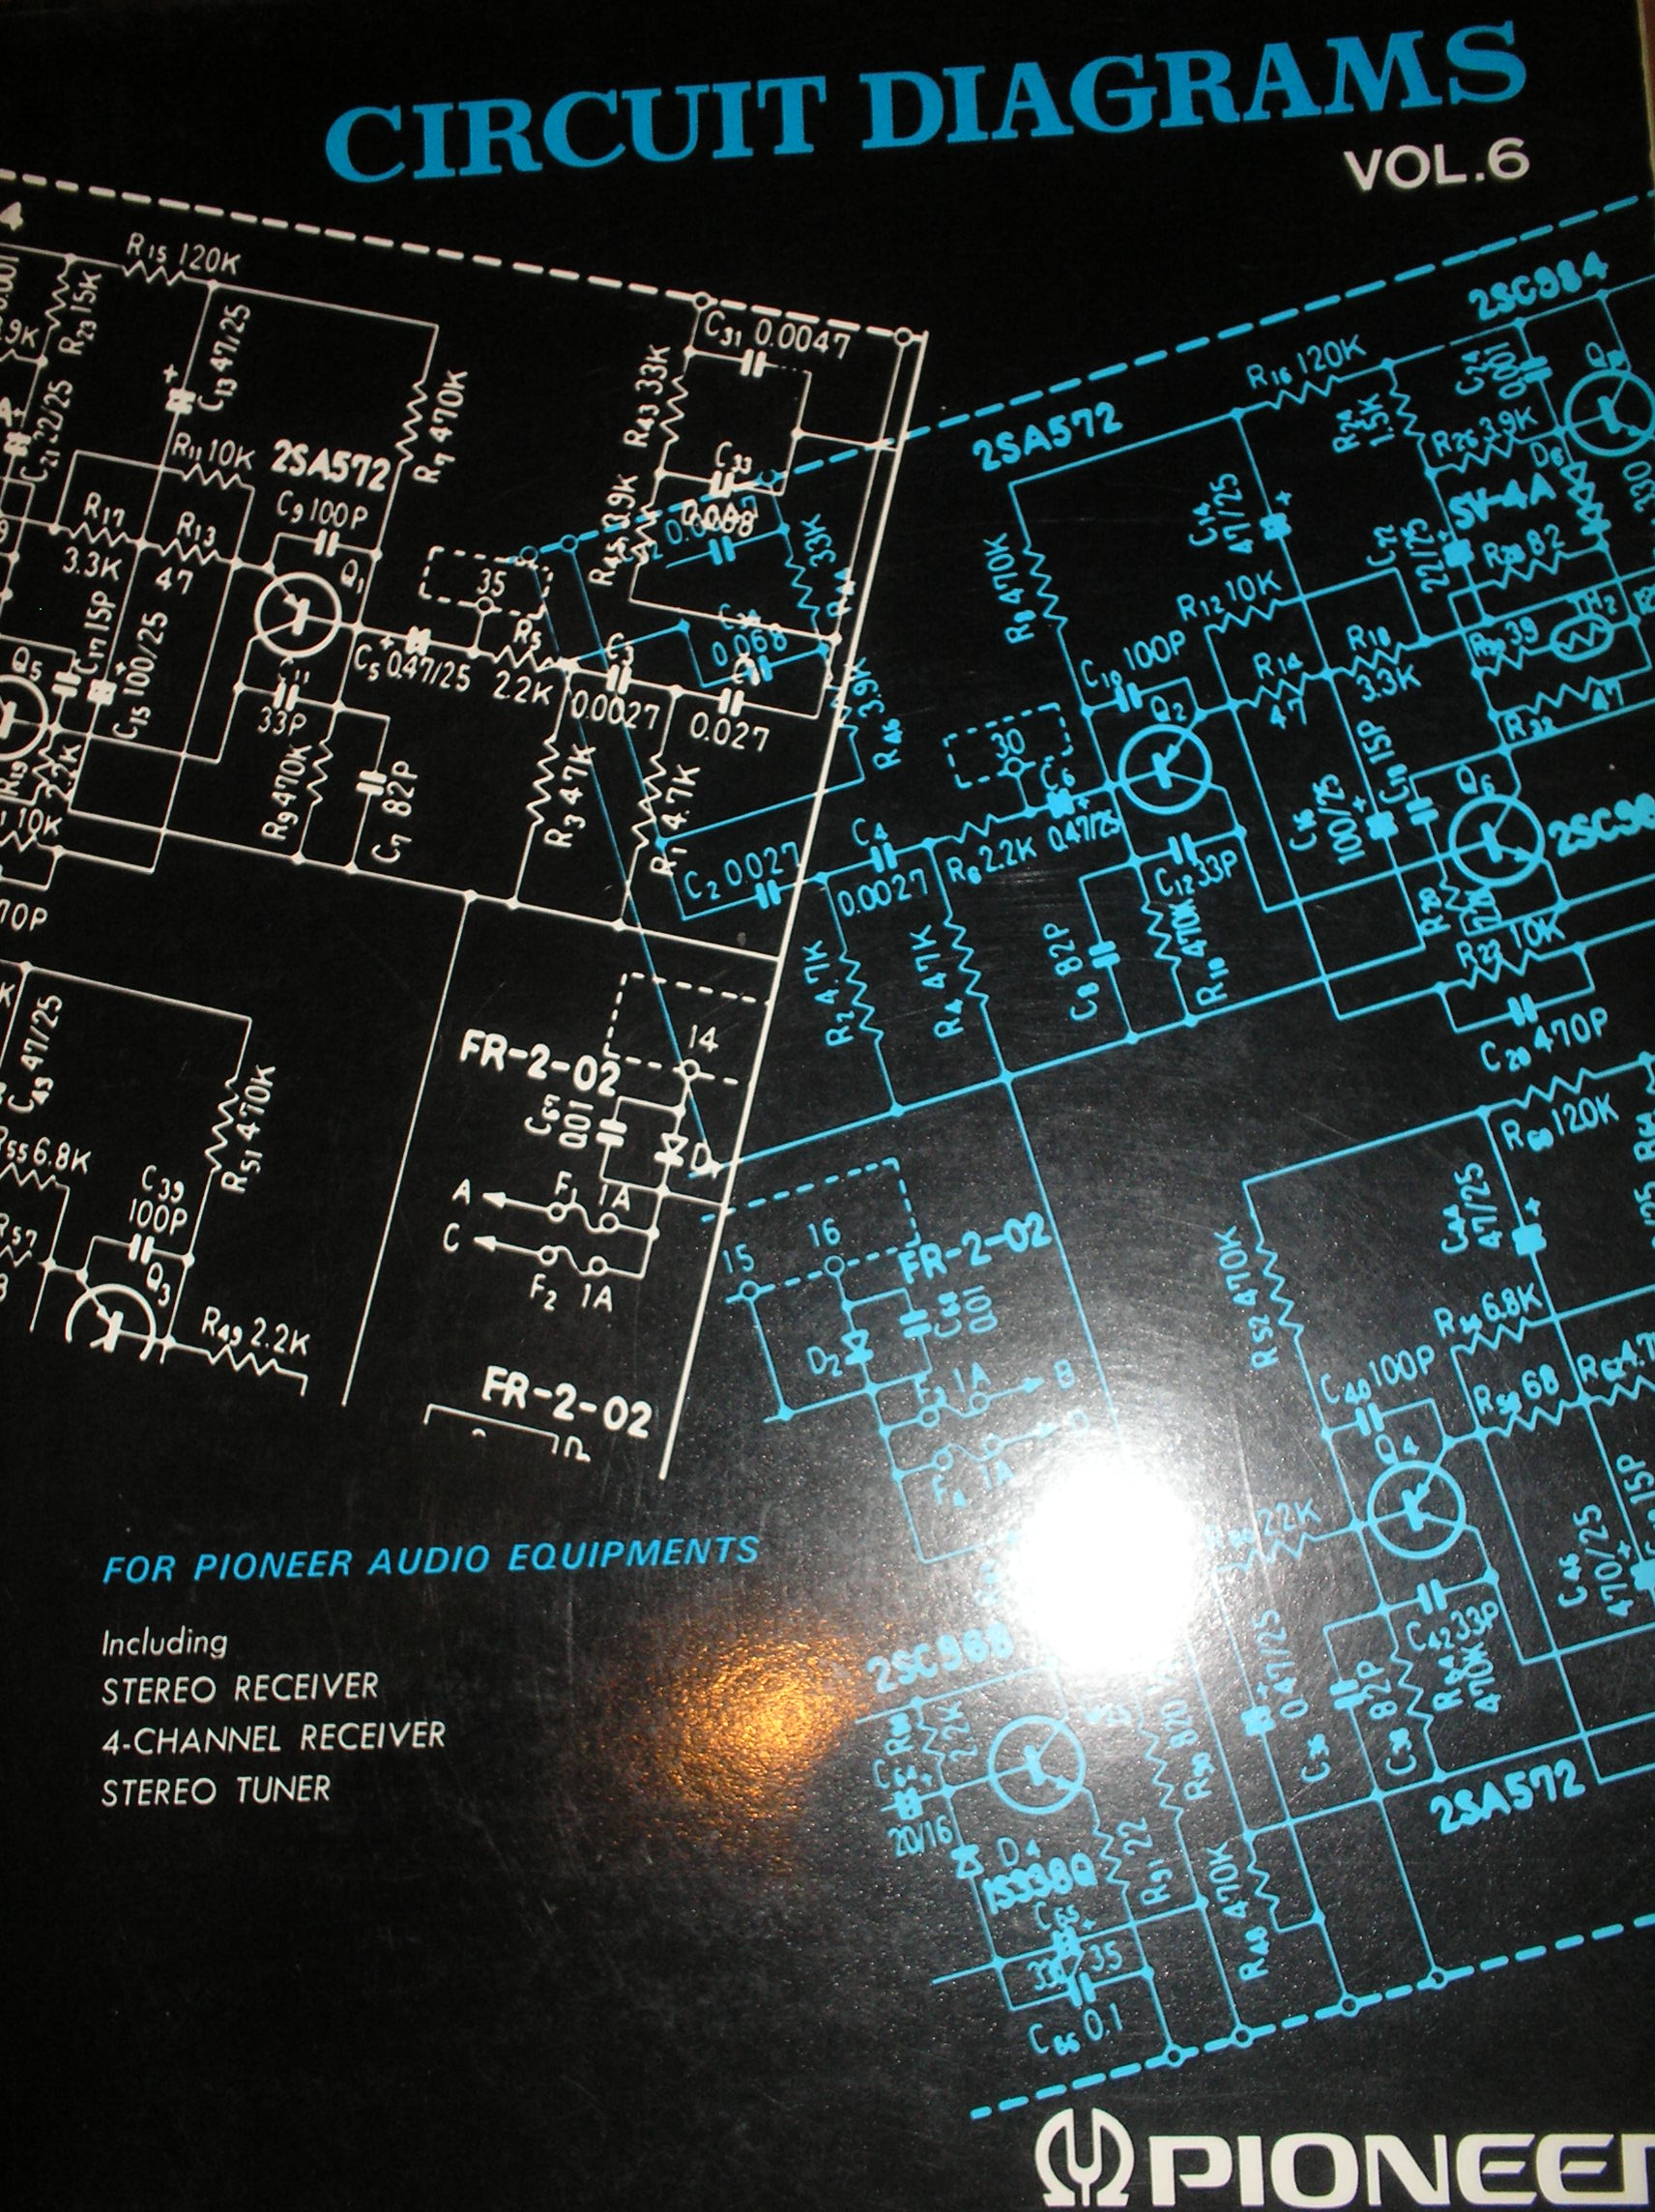 QX-646 Stereo Receiver fold out schematics.   Book 6